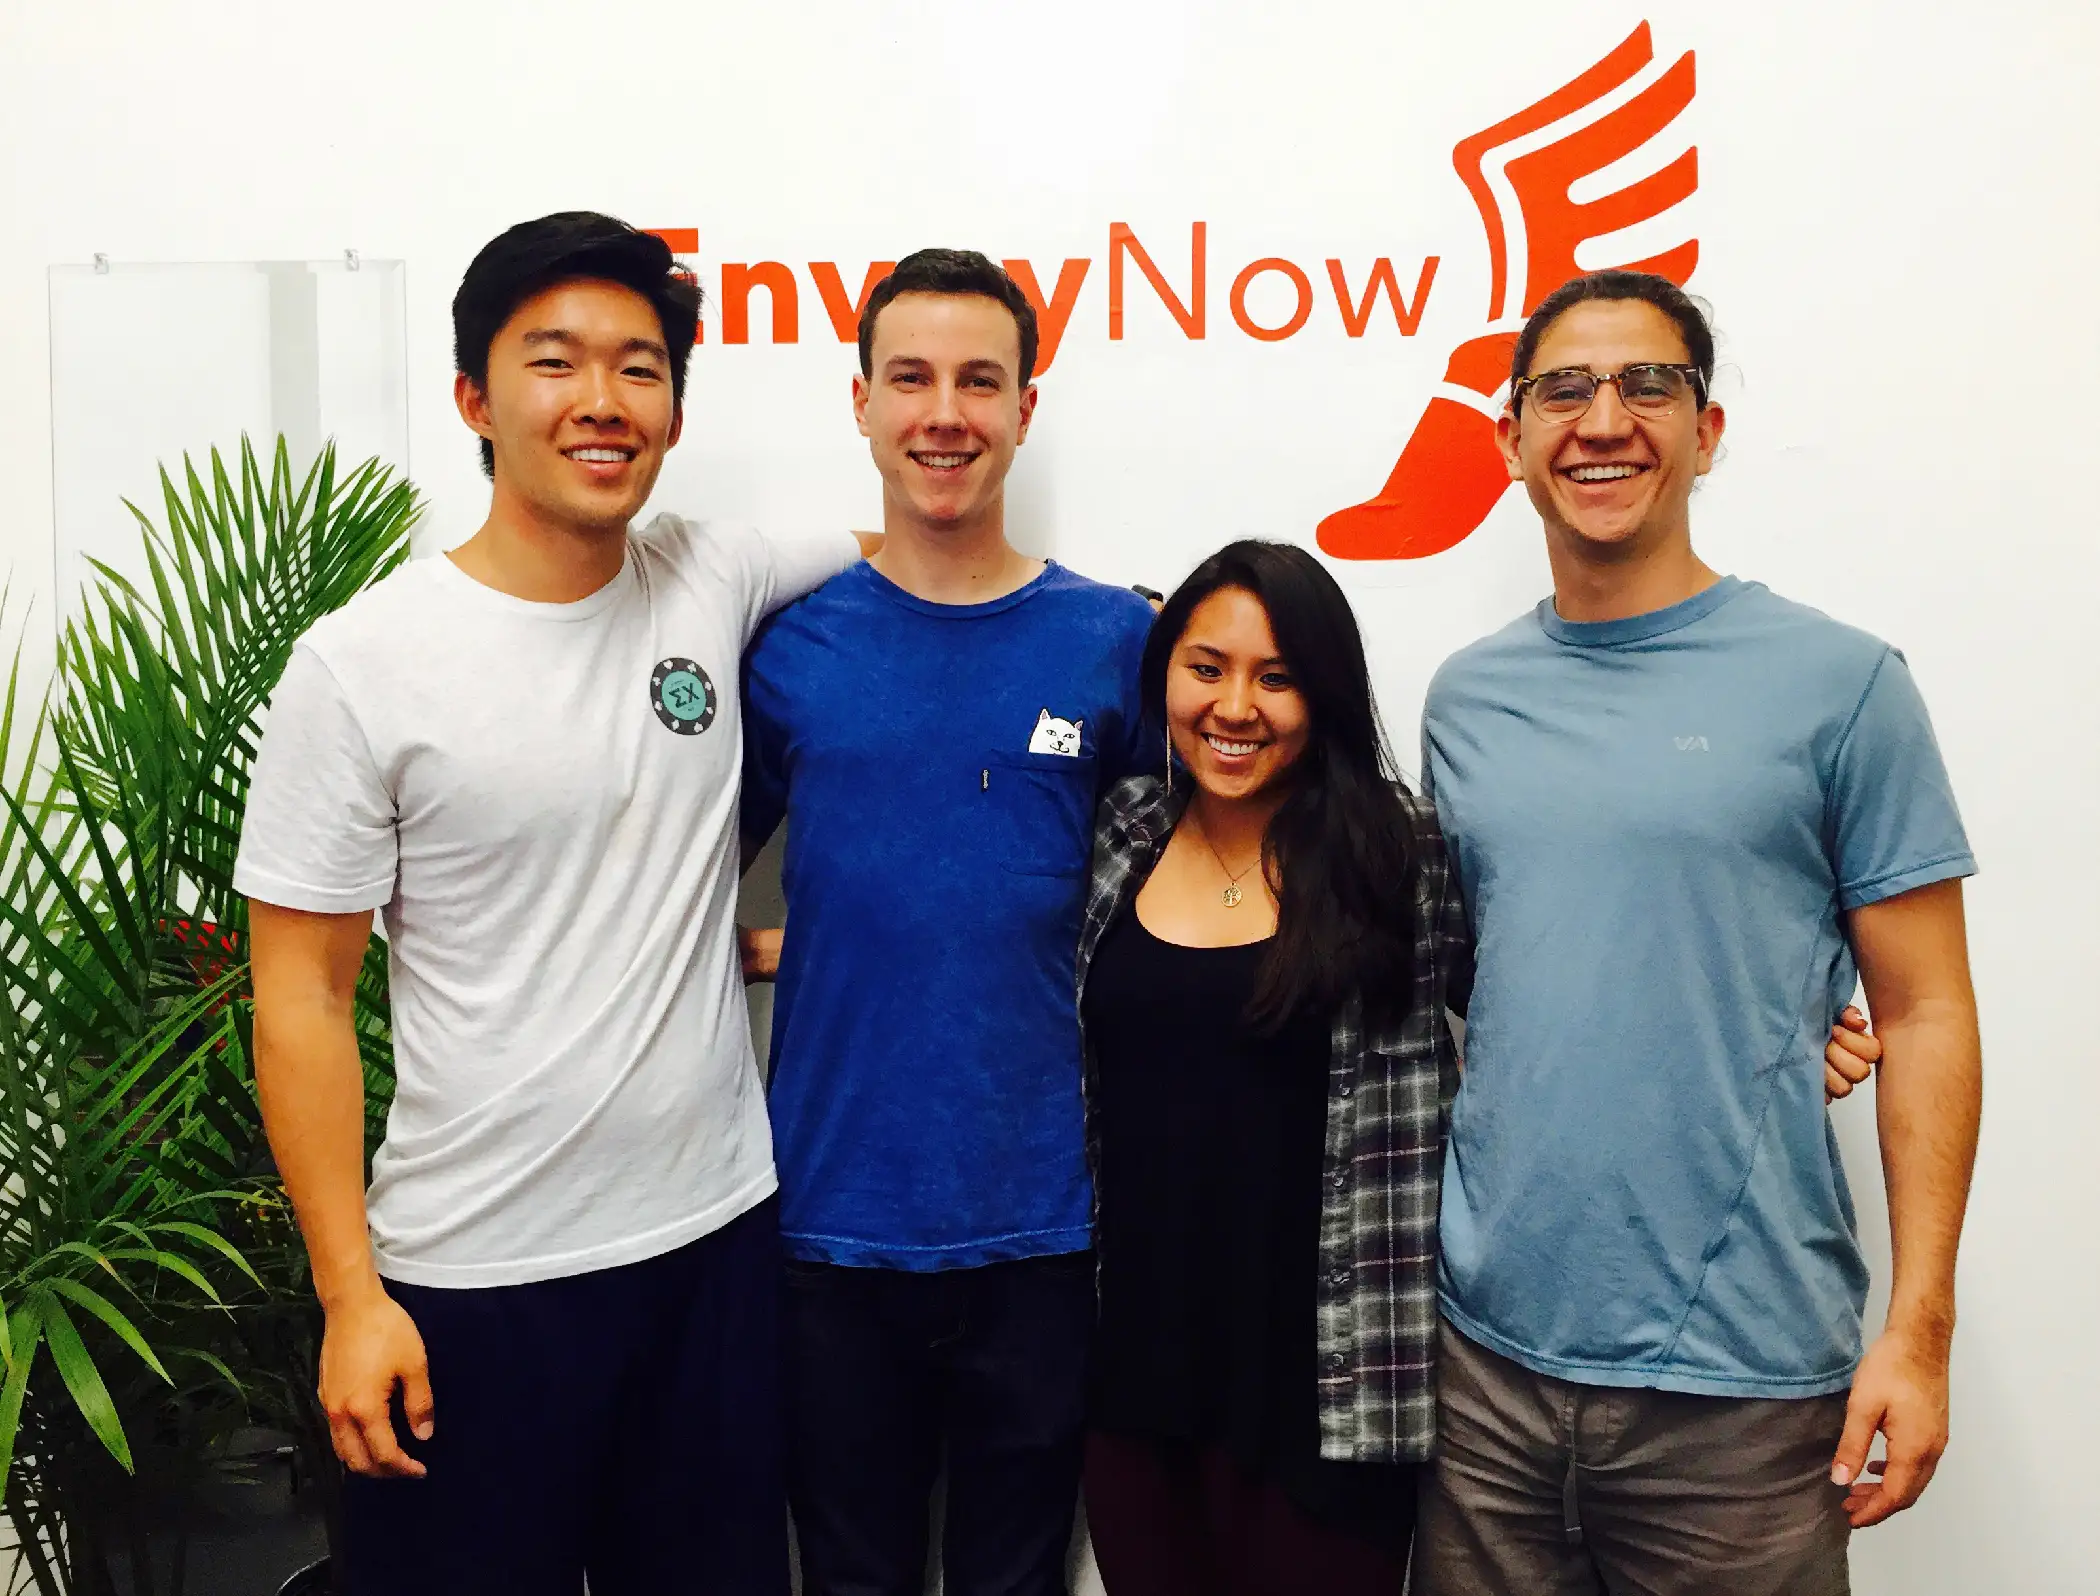 From left to right: Anthony Zhang (CEO), Parker Seagren (CTO), Kristi Hupka (EVP), Gabriel Quintela